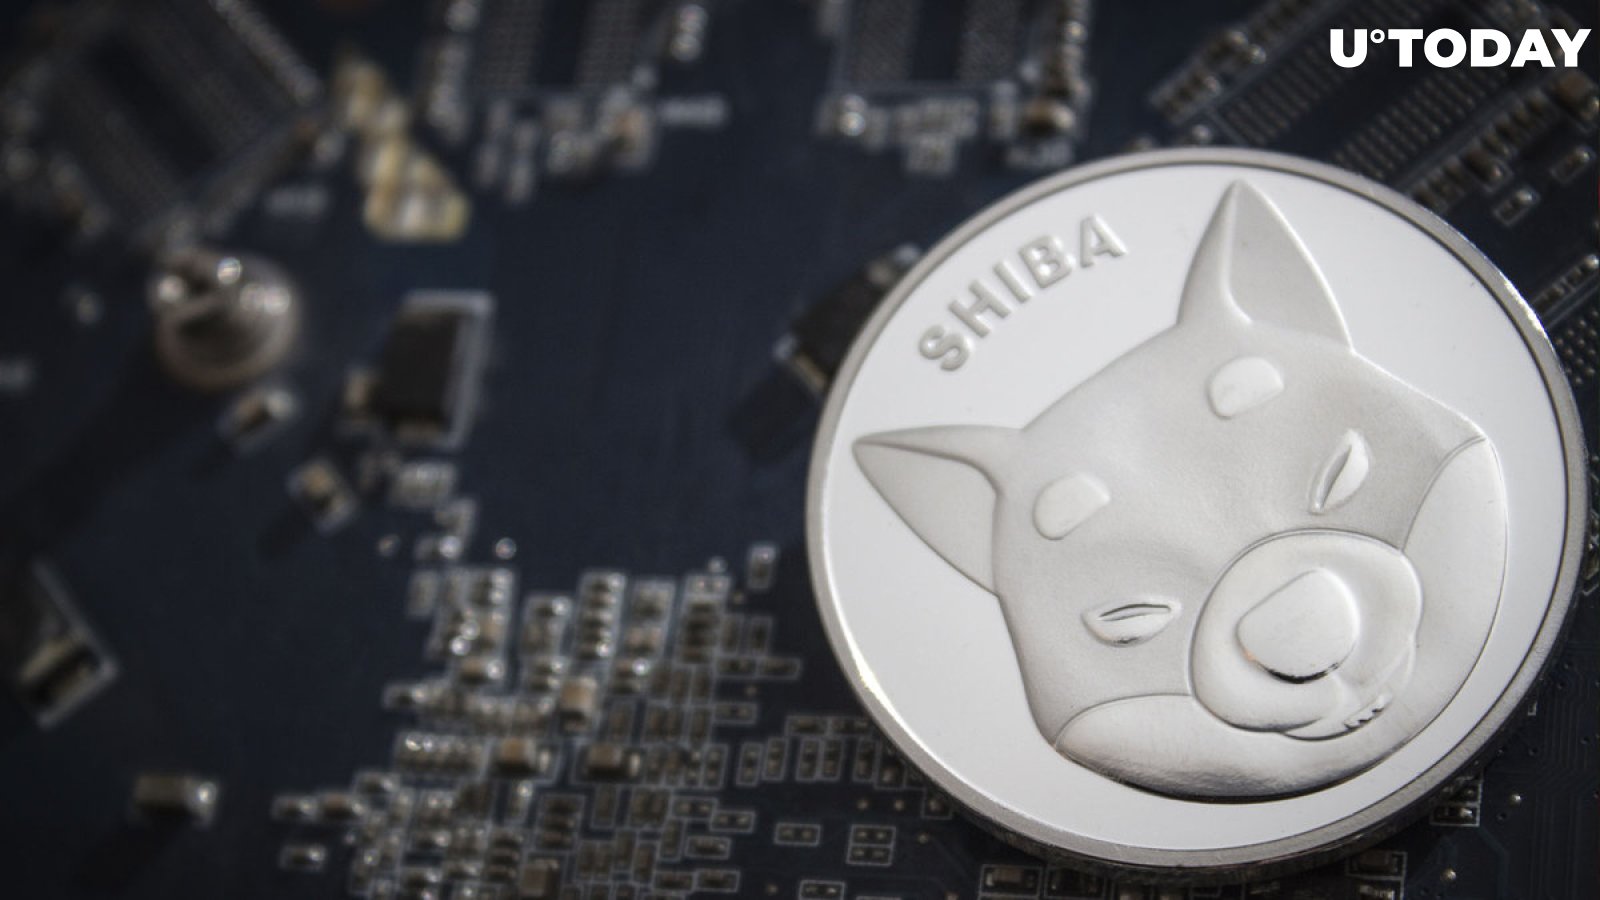 New Shiba Inu (SHIB) Support Announced by This Crypto App: Details